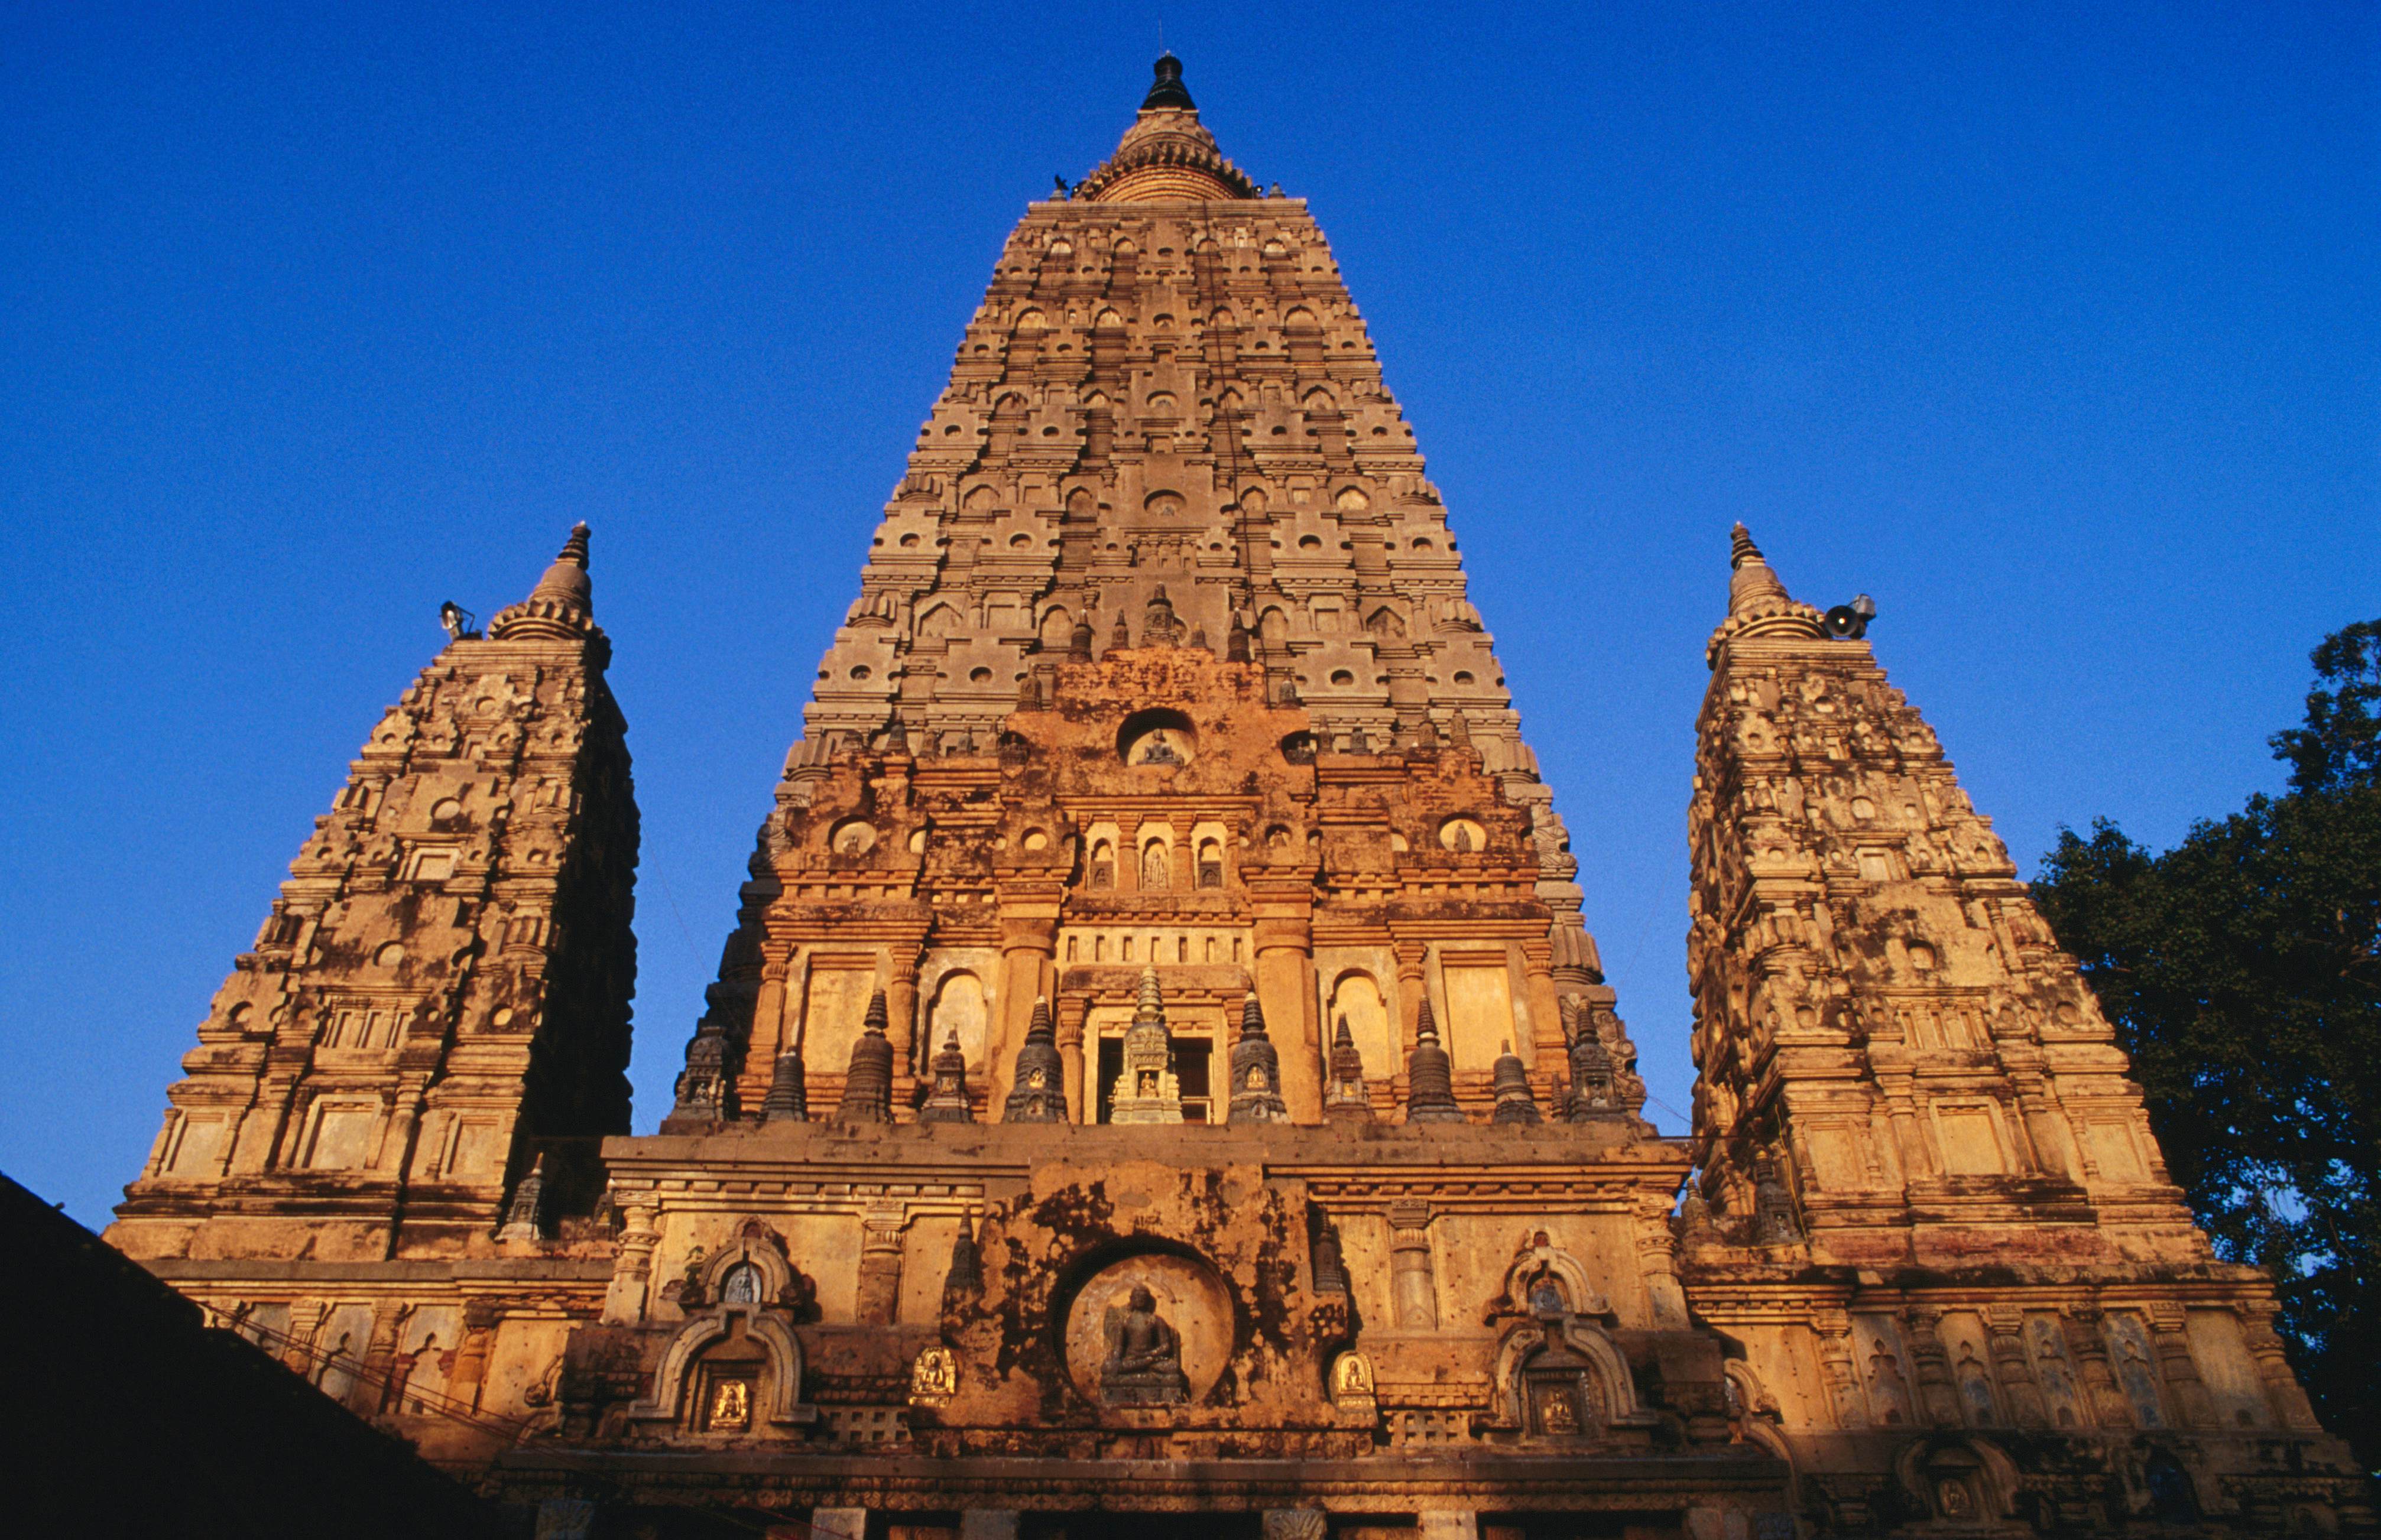 Mahabodhi Temple | Bodhgaya, India Attractions - Lonely Planet